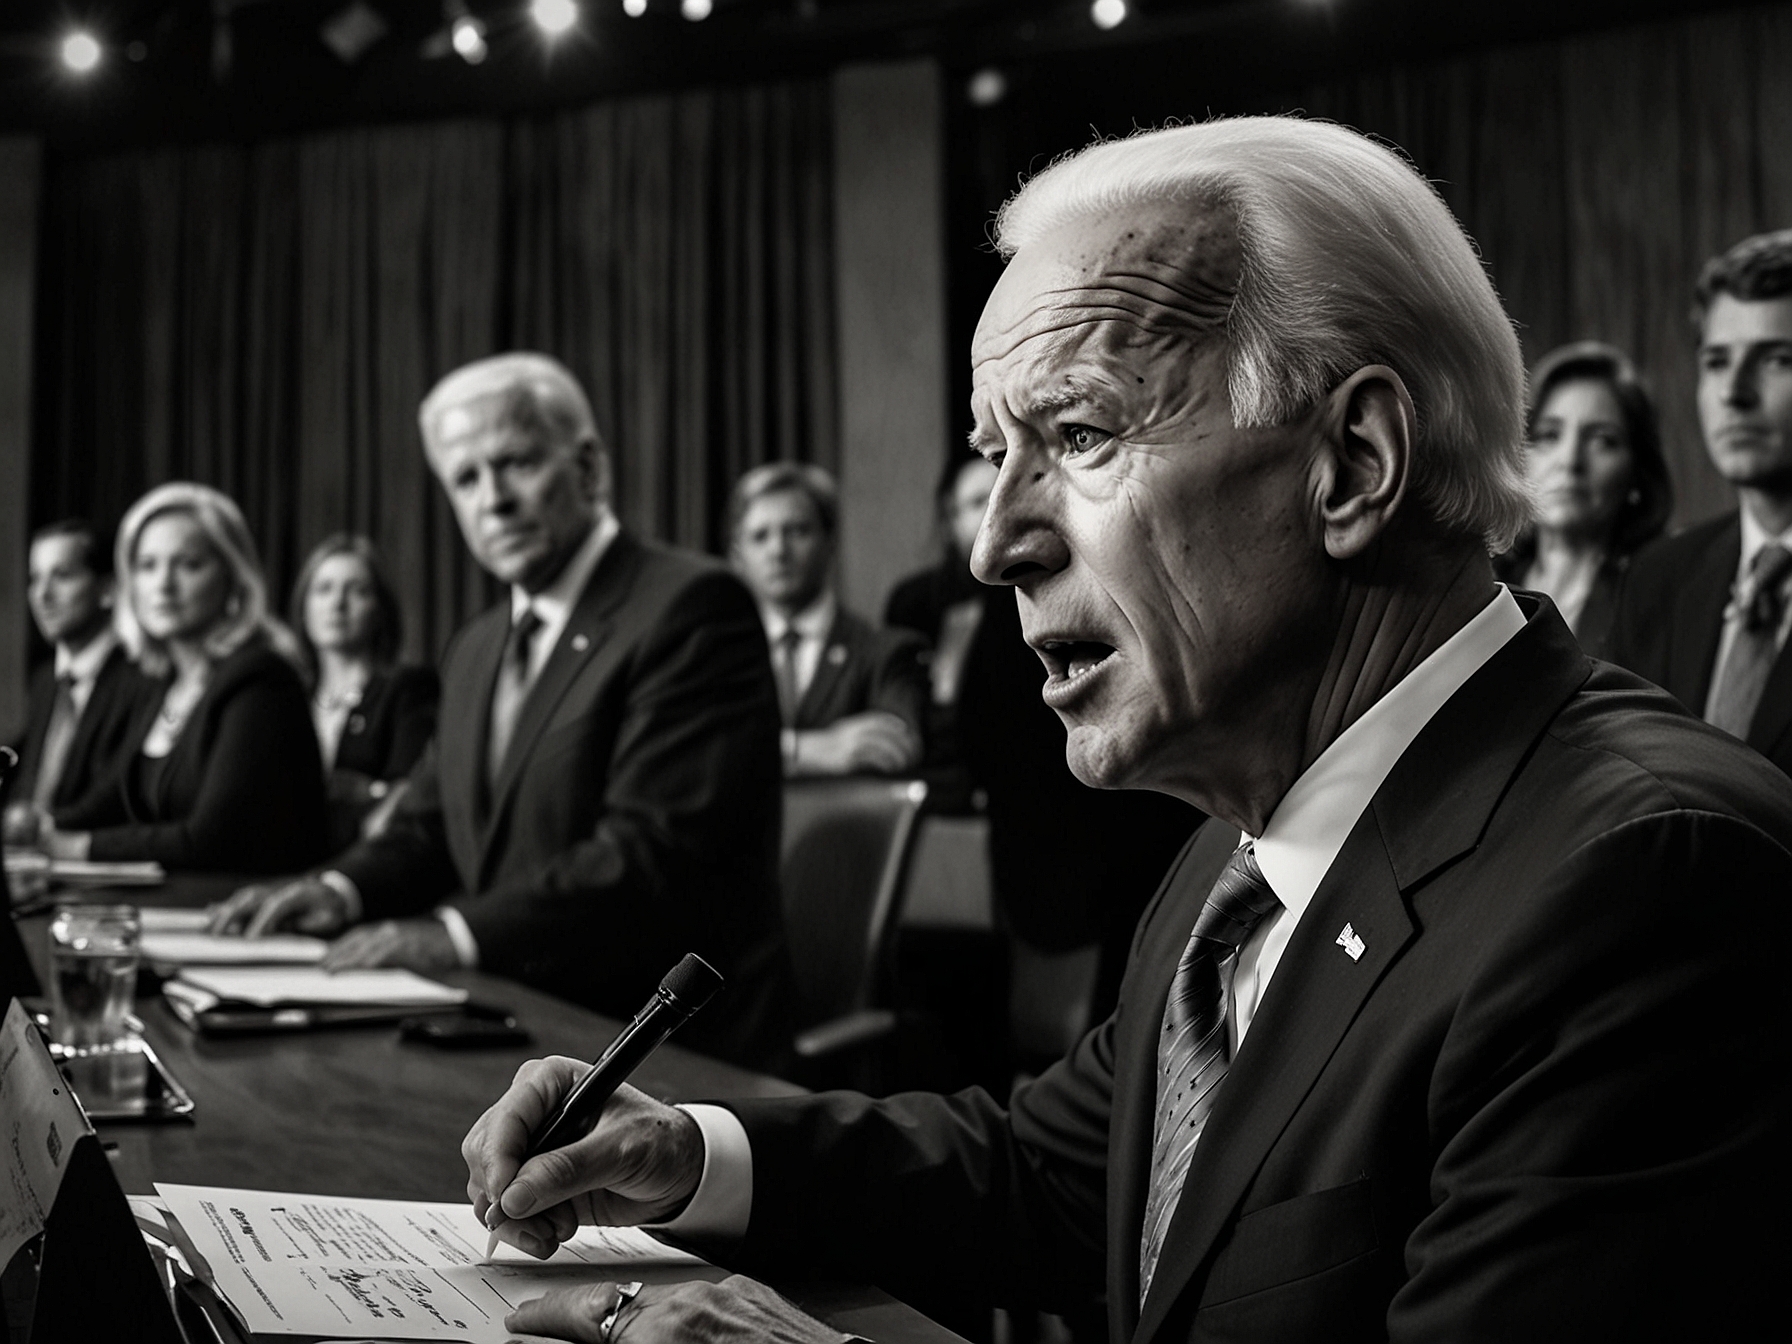 President Joe Biden speaking at a debate stage, looking visibly stressed as other candidates and moderators react, capturing the tension and scrutiny of his performance.